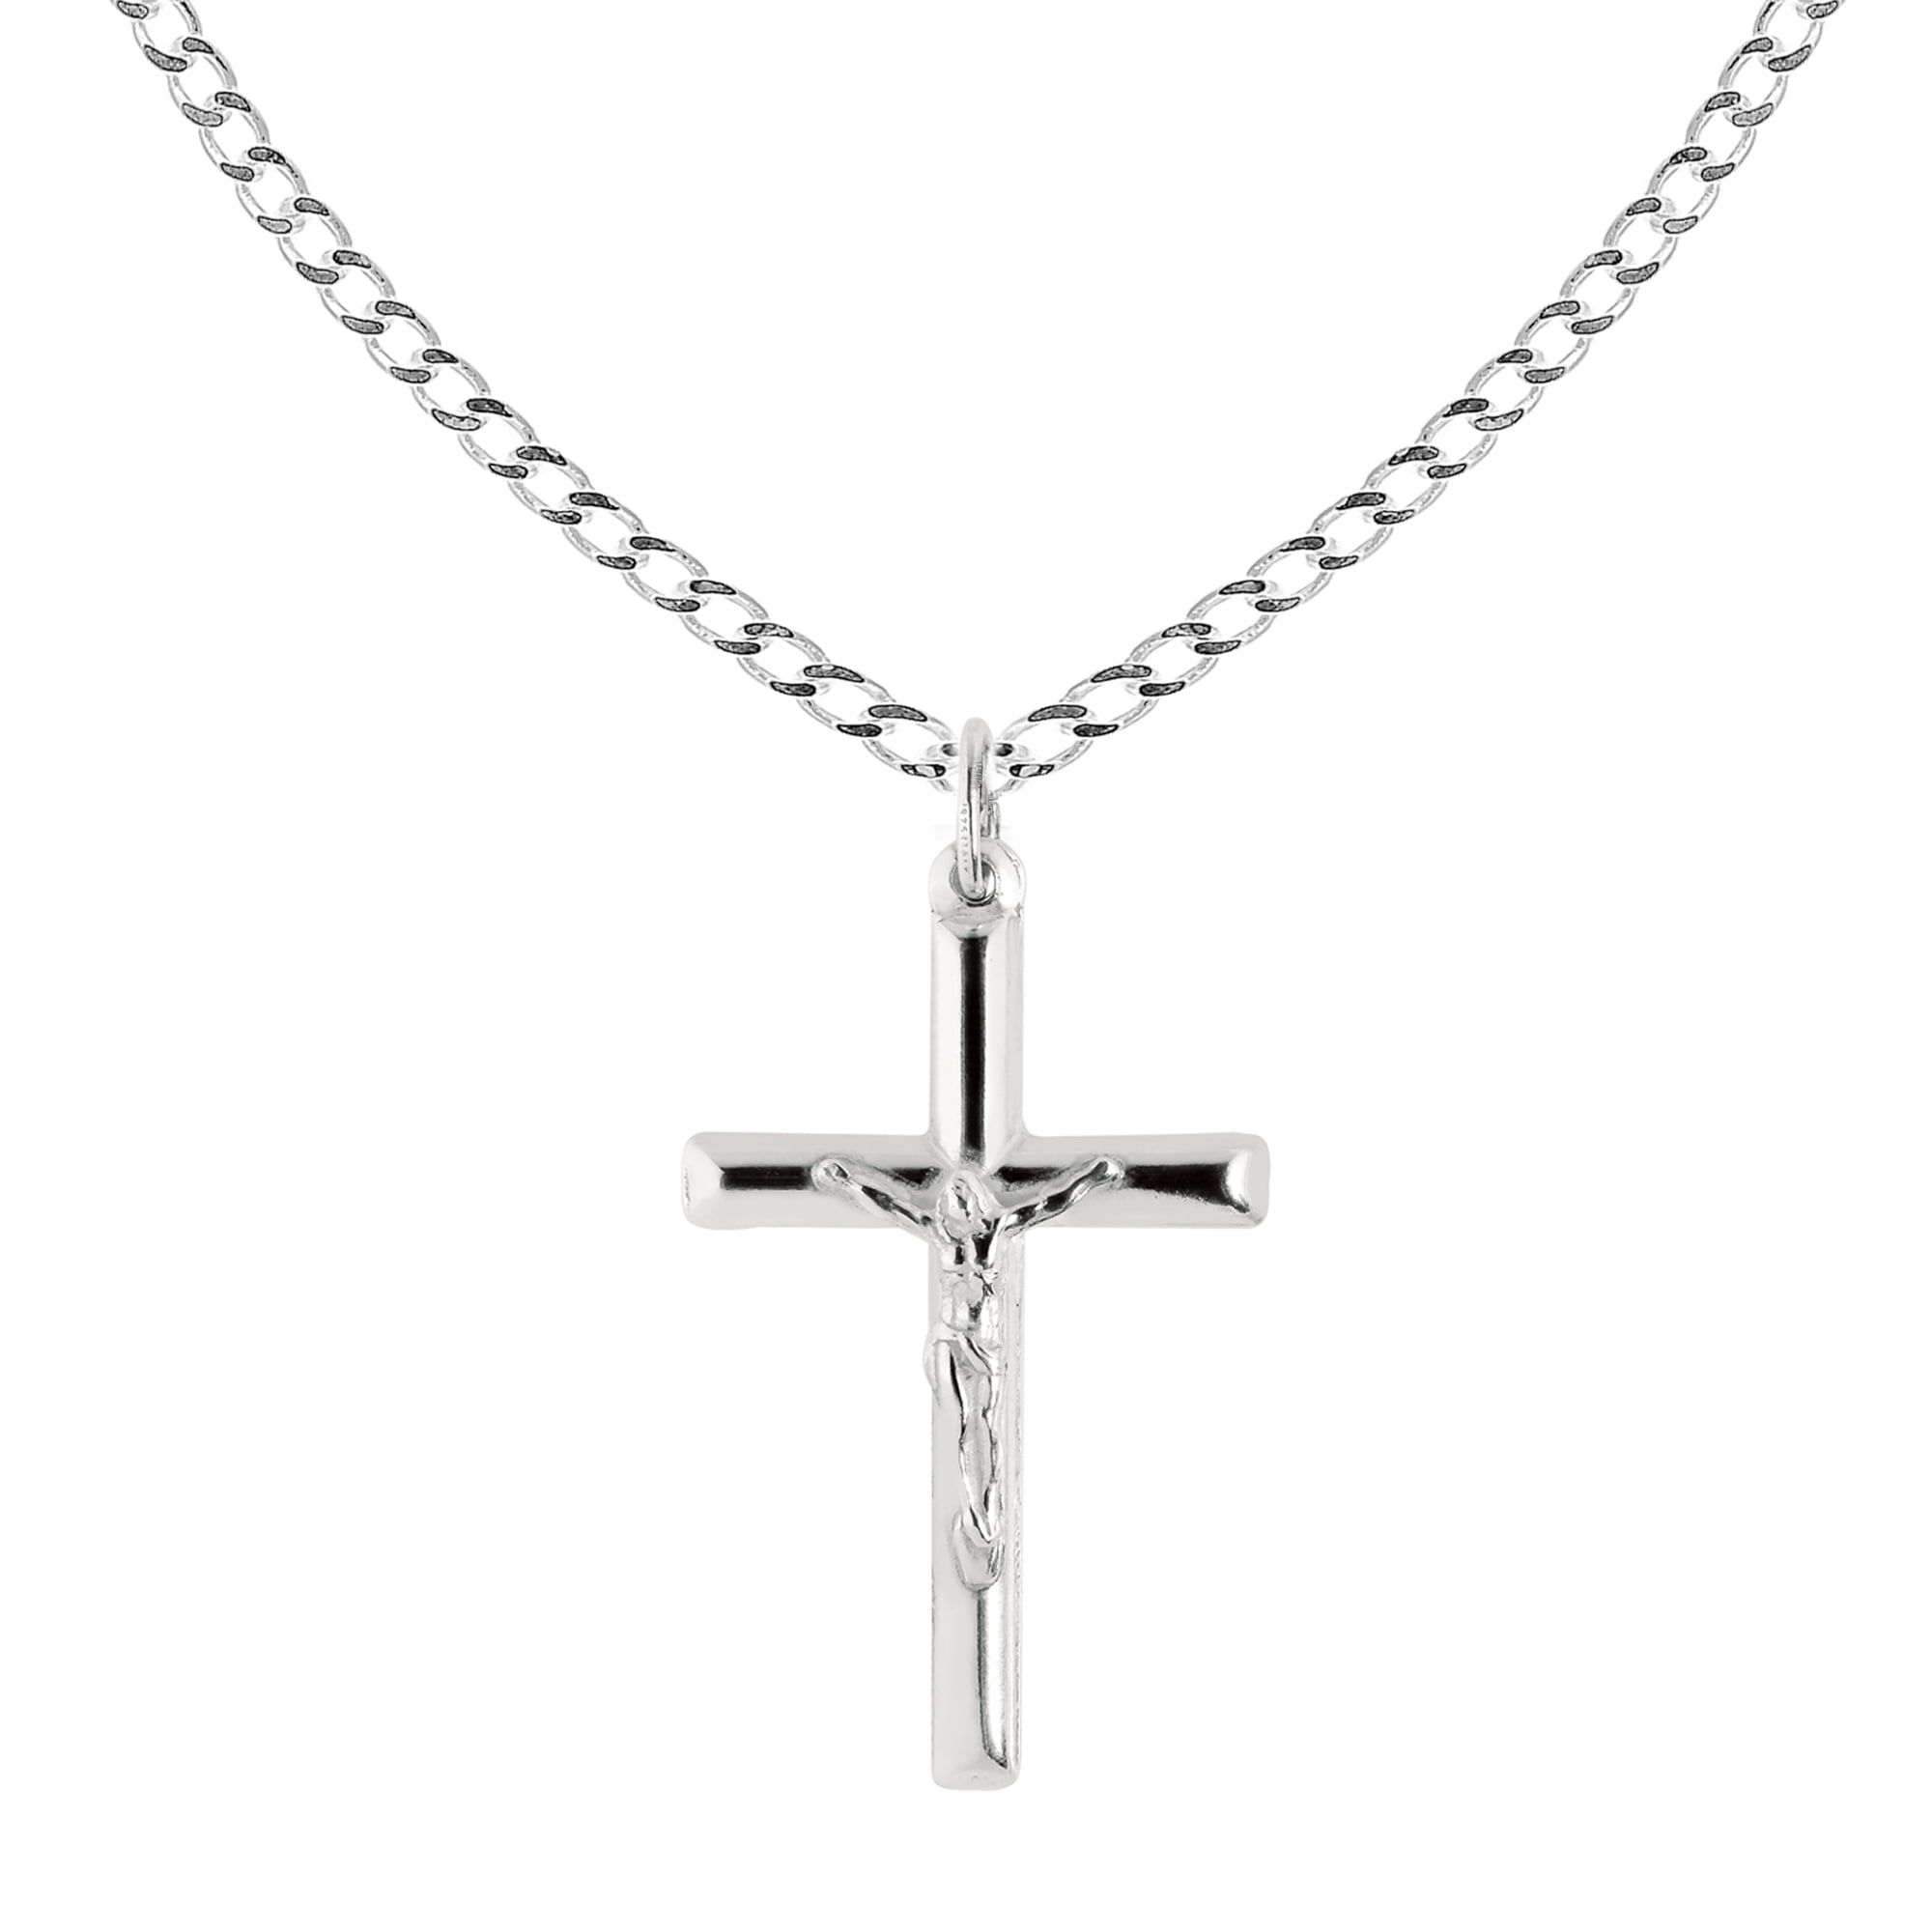 Men S Sterling Silver Large Tubular Crucifix Cross Charm Necklace